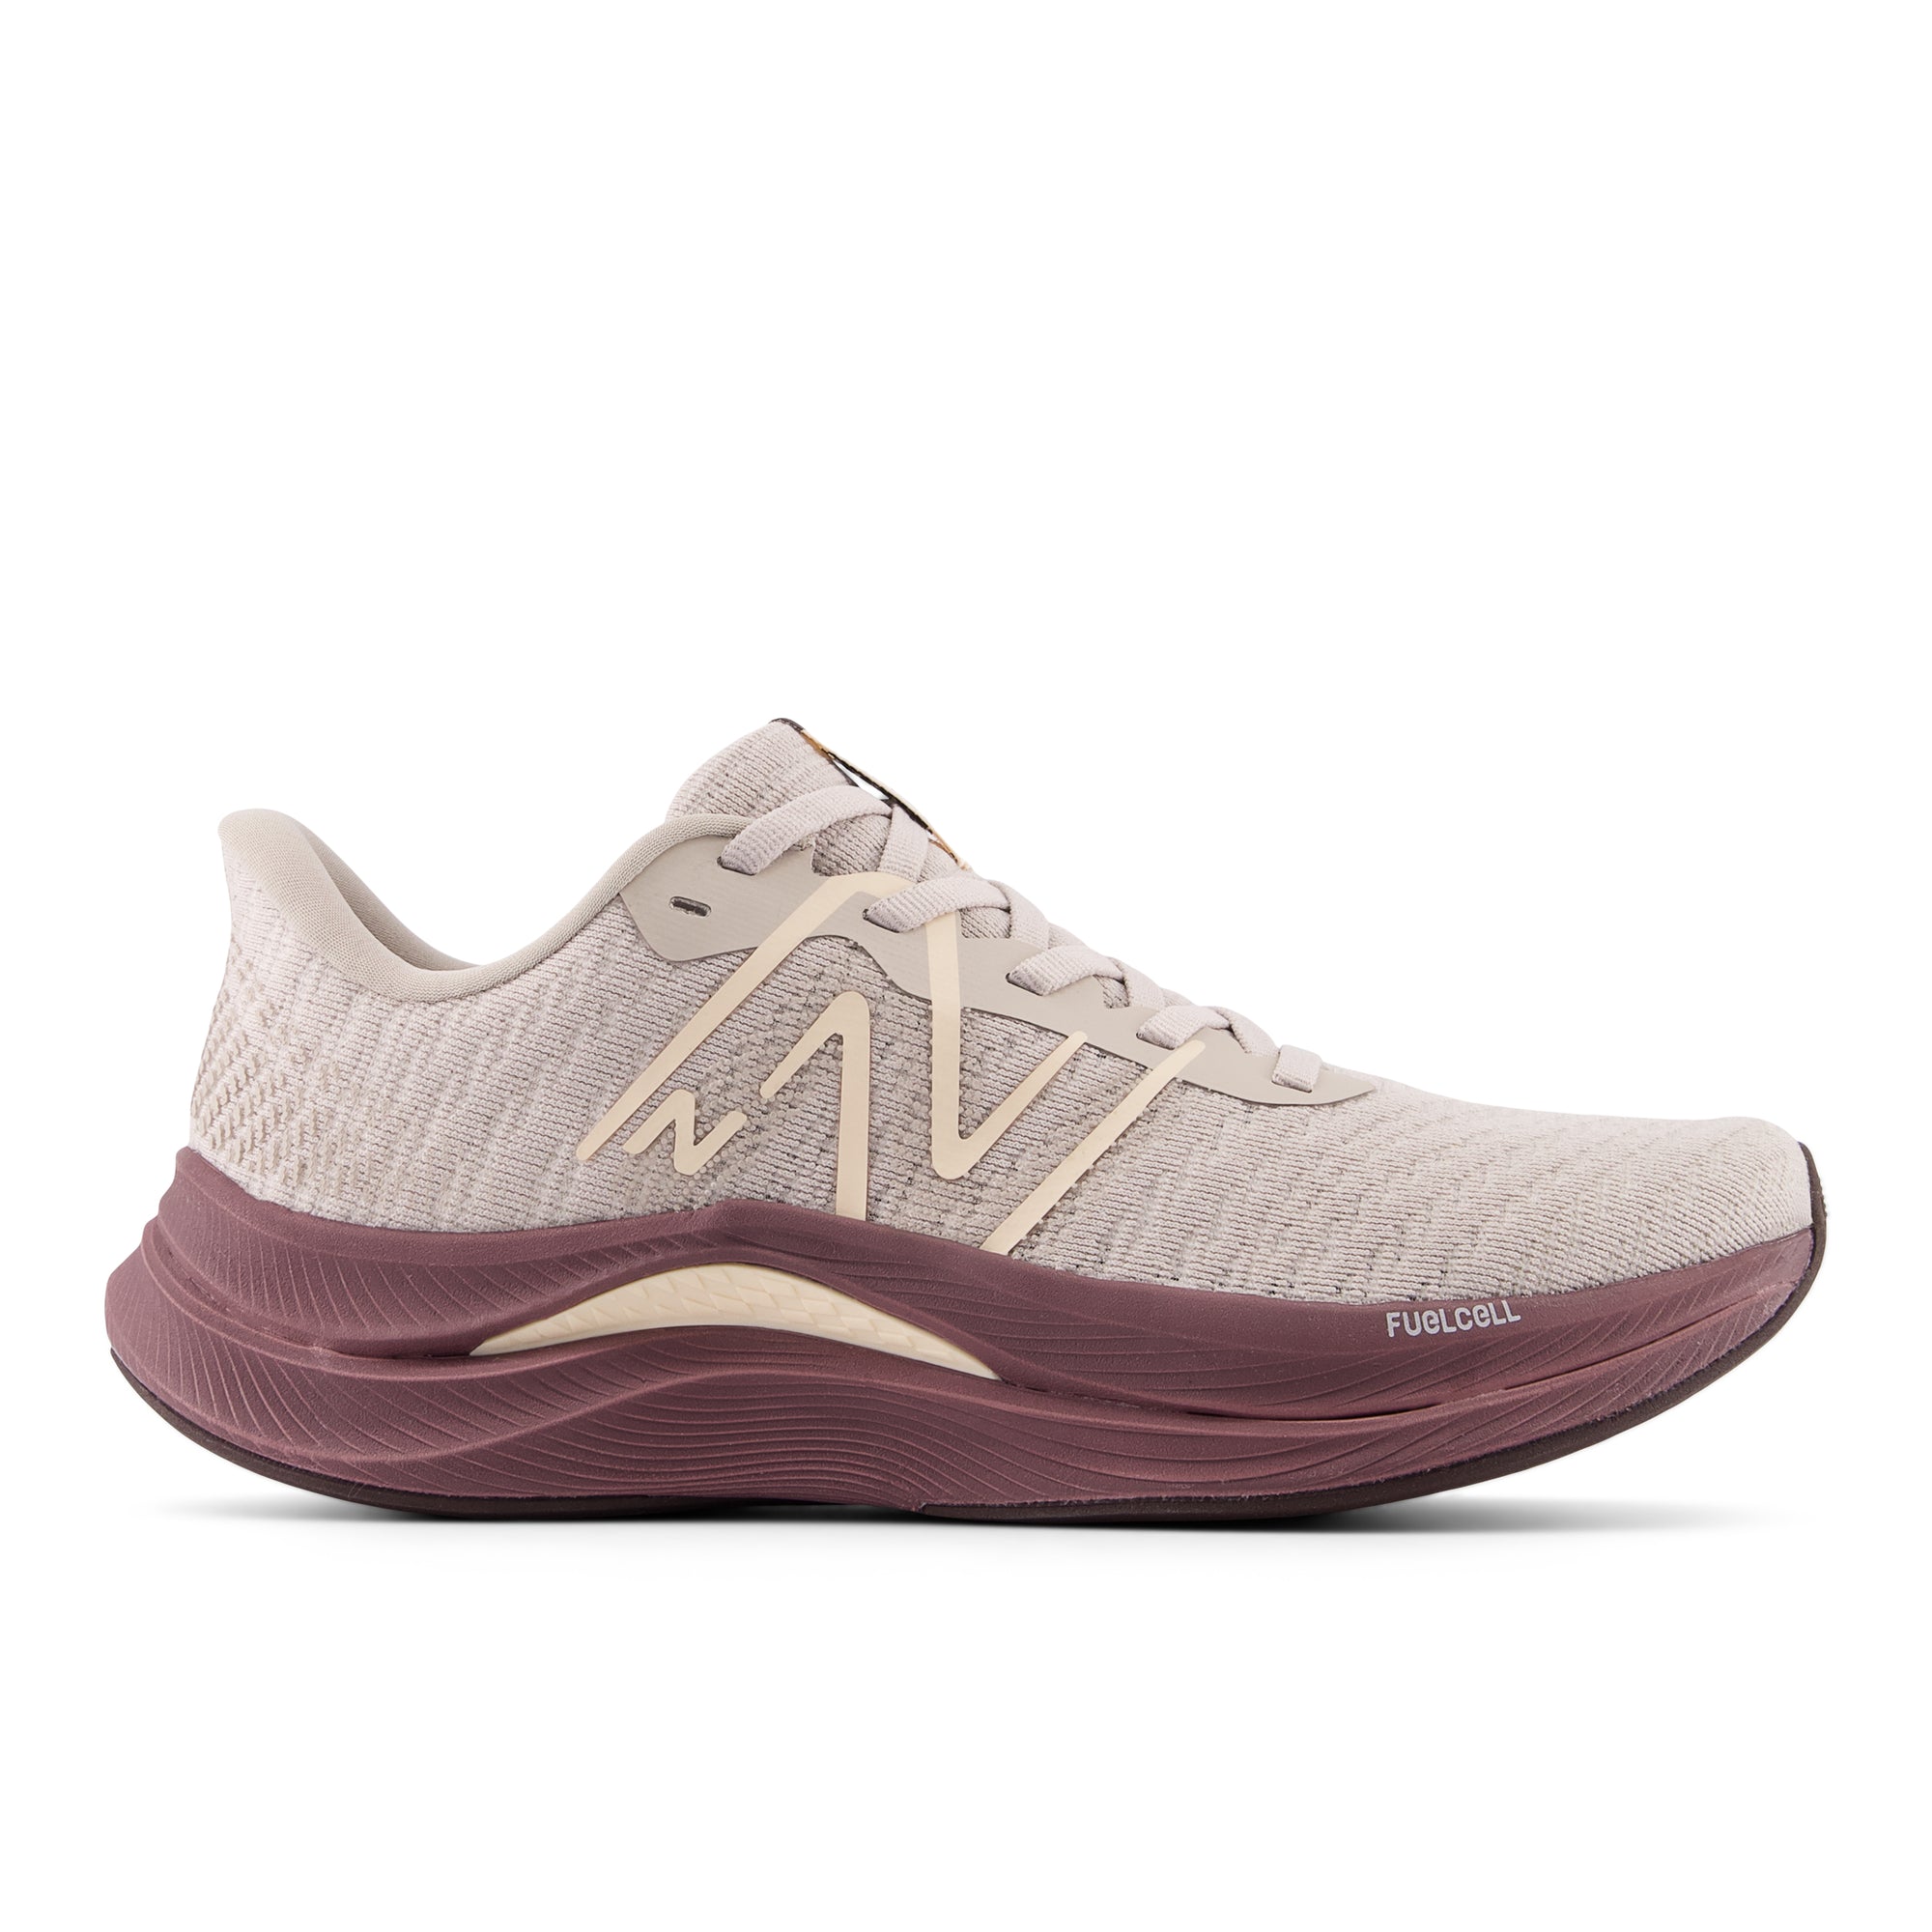 NEW BALANCE FUELCELL PROPEL V4 - FEMME